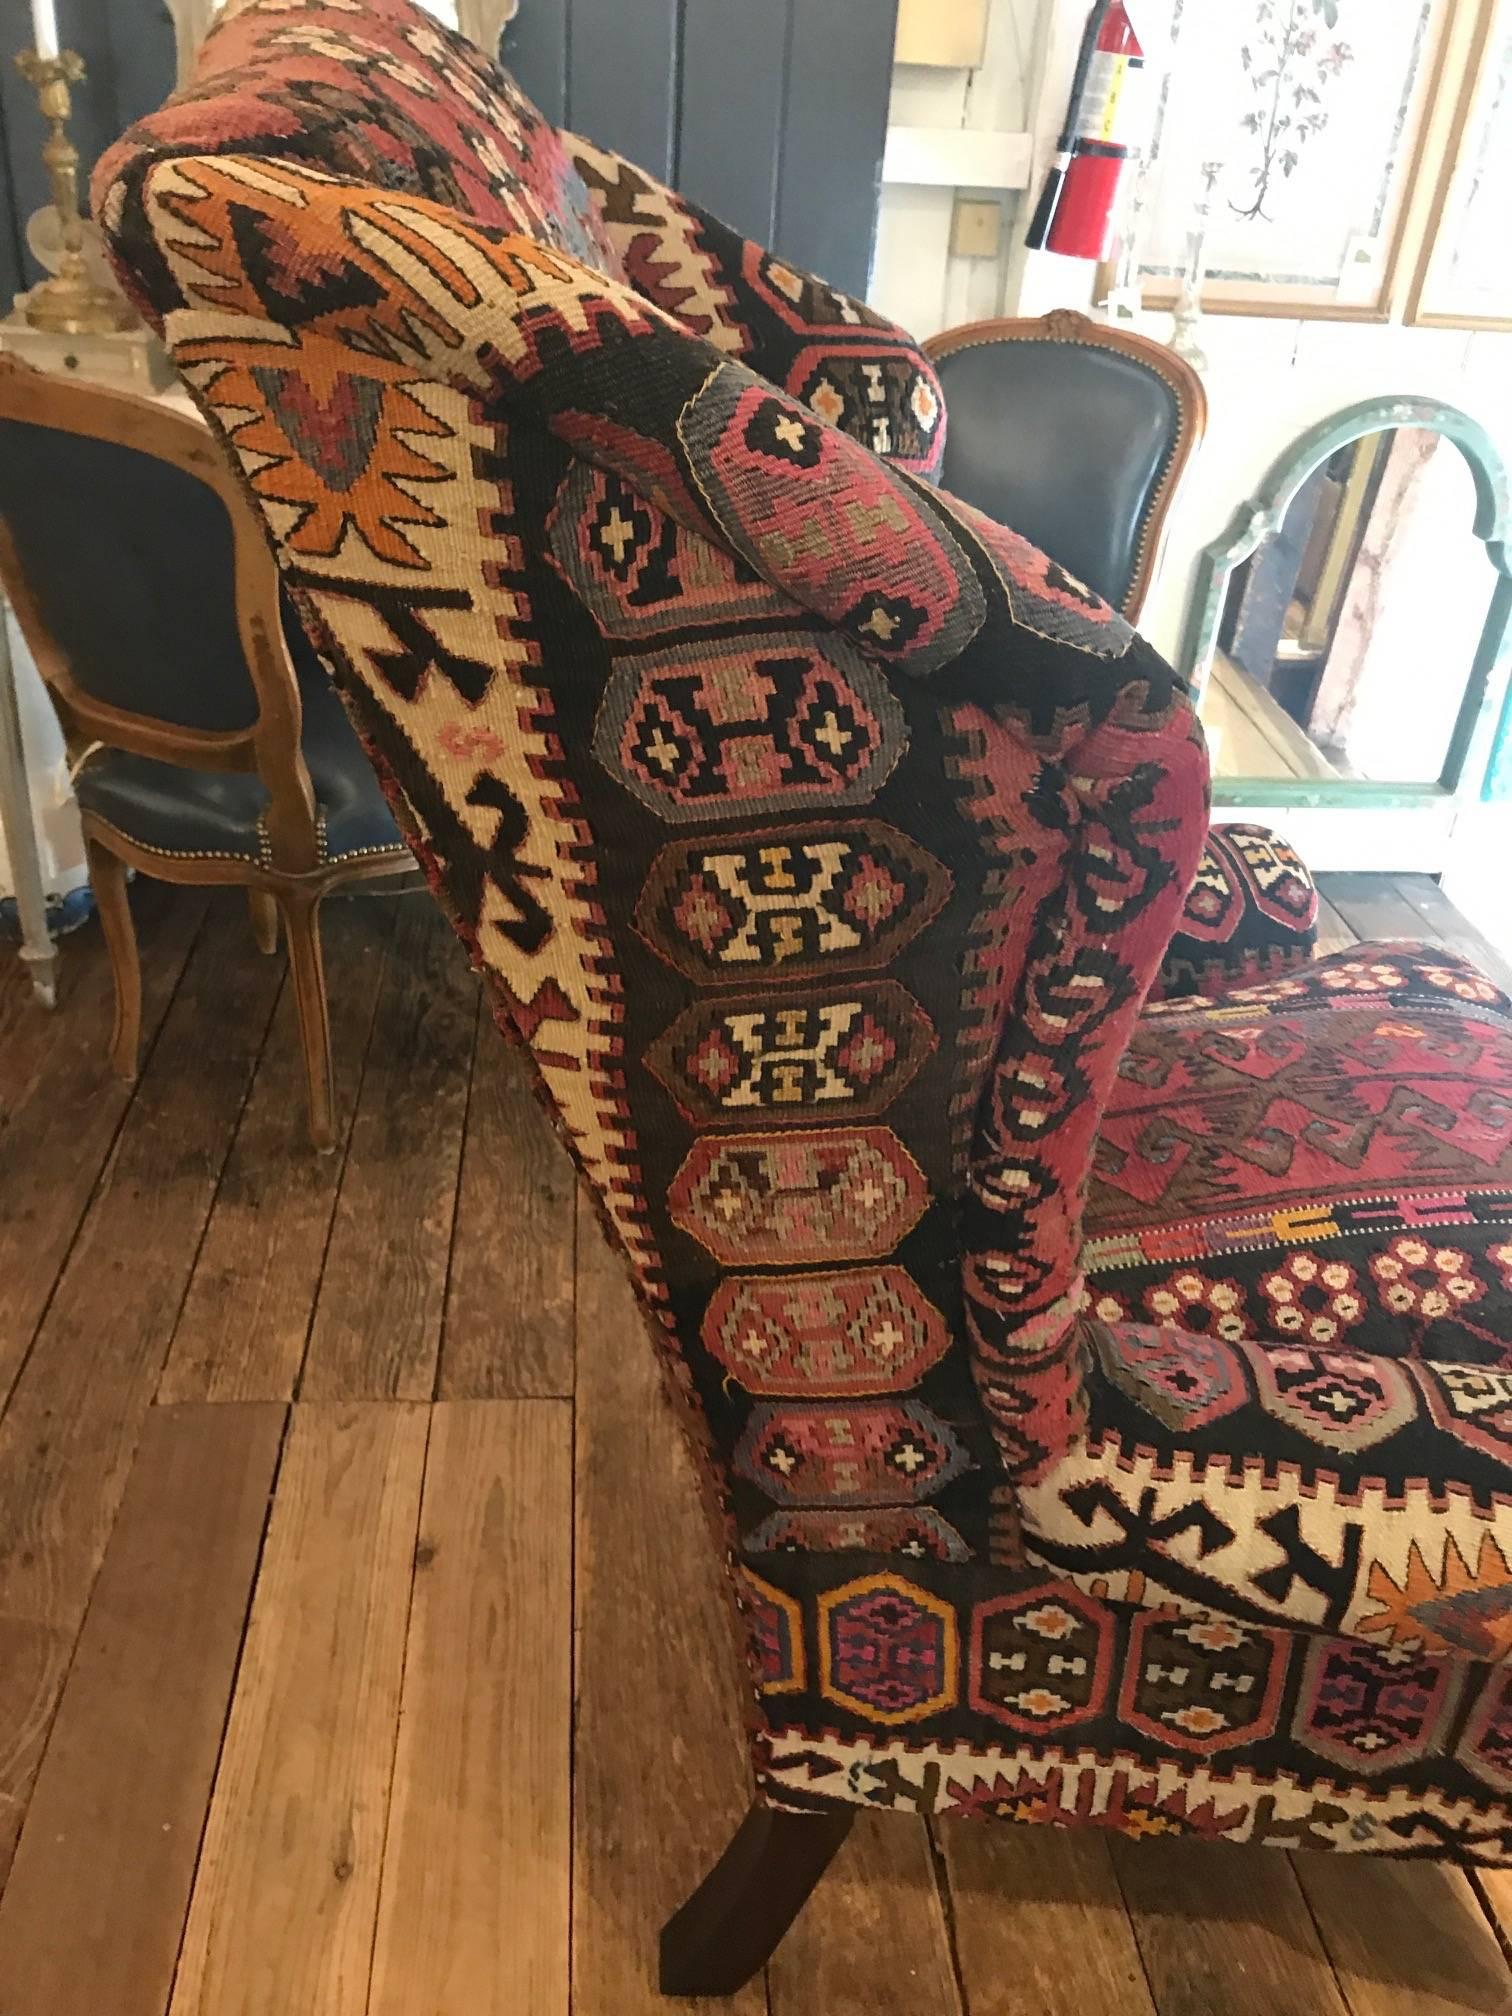 Classic wing chair by George Smith, with wonderful multicolored Kilim upholstery in brown, rasberry, cream, gold, blue and pink. It's the chair that steals the show with it's rich character and warm lively color palette. Dark mahogany handsome